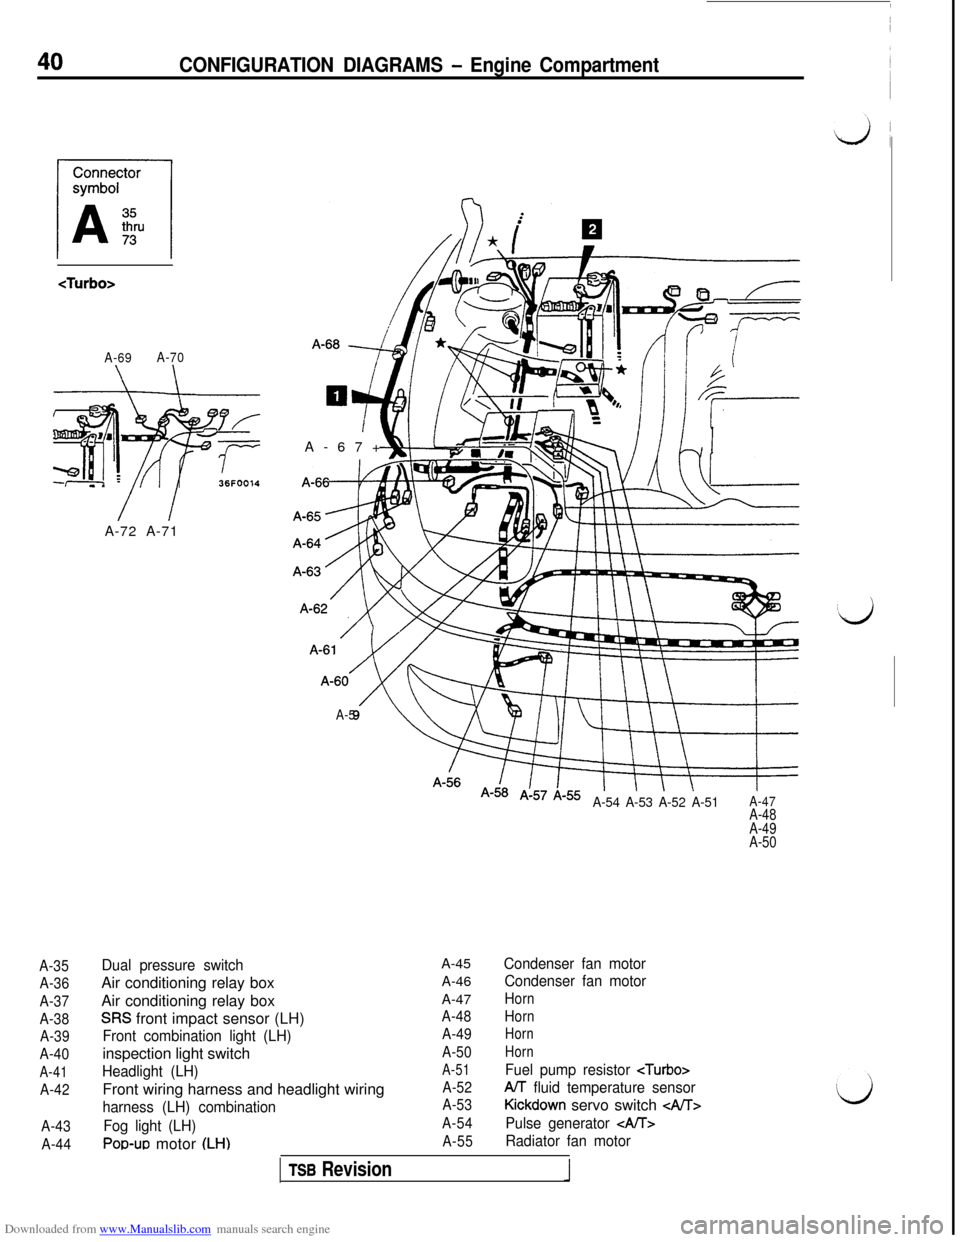 MITSUBISHI 3000GT 1995 2.G Service Manual Downloaded from www.Manualslib.com manuals search engine CONFIGURATION DIAGRAMS - Engine Compartment
<Turbo>
A-69A-70
\ \
36FOO14
A-35
A-36
A-37
A-38
A-39
A-40
A-41
A-42
A-43
A-44A-72 A-71A-67+
A-5
A-